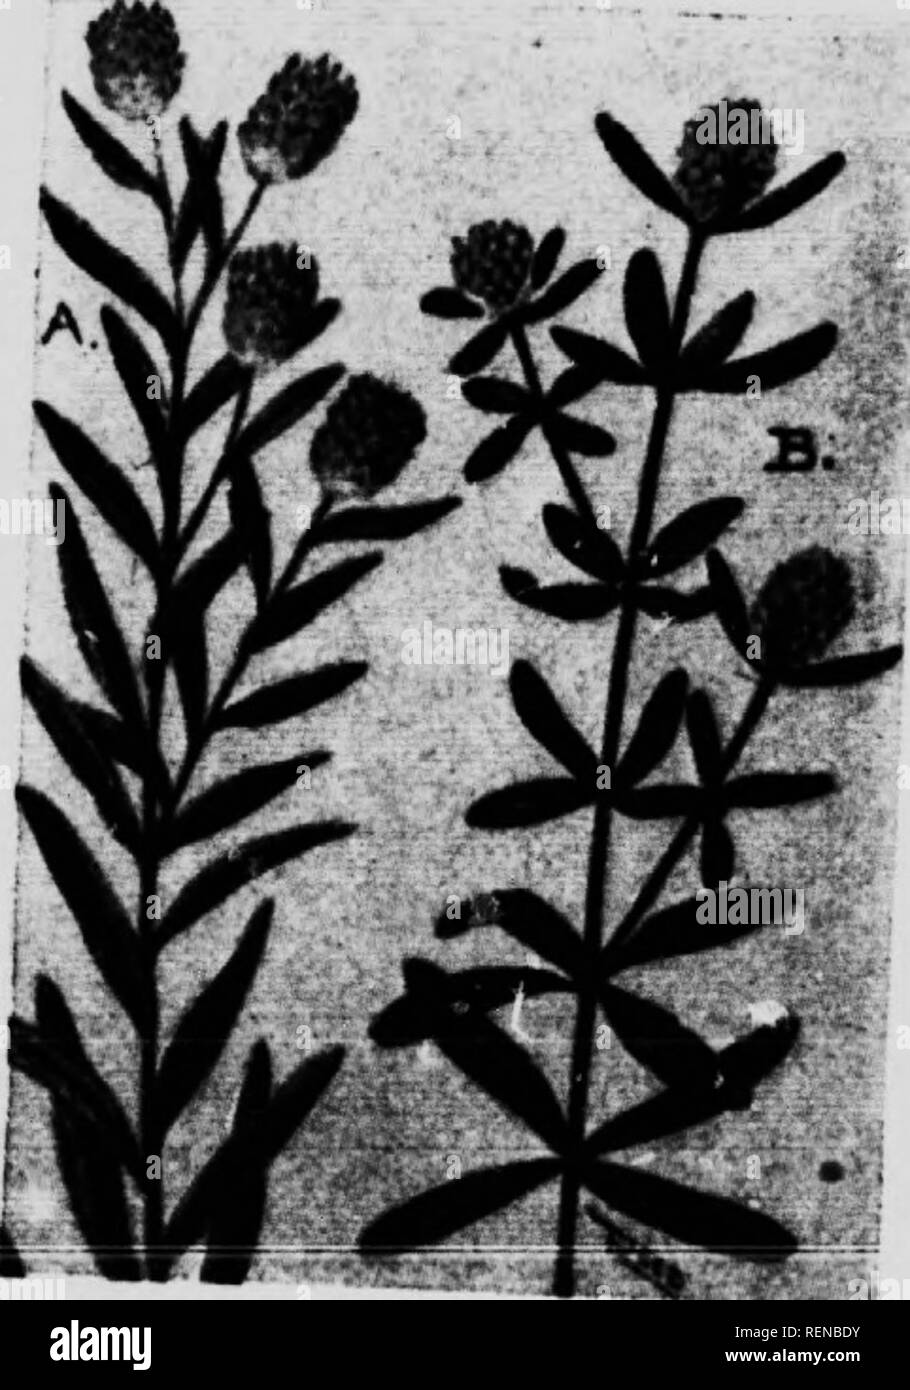 . Flower guide [microform] : wild flowers east of the Rockies. Flowers; Fleurs; Botanique; Botany. &quot;11(1 not visililo f,.â,â til,. â.ifÂ»Ti .r ^*-'&quot;'-' ^'&quot;&quot;tei- '-&quot;- i&gt;ig.â and abollndJ^nrlS-SX u&quot;S ' *Â° '&quot; the .t&lt;Mn. cro,' 1 k Tl ' ;&quot;'&quot;â *''''' &quot; ^'-''^ '&quot;â¢&quot;Â»&quot;'' biancli. seated within t,f ^1 'â¢ *'&quot;&quot; *&quot;&quot;'' &quot;* &lt;&quot;'*'cli 104. Please note that these images are extracted from scanned page images that may have been digitally enhanced for readability - coloration and appearance of these illustra Stock Photo